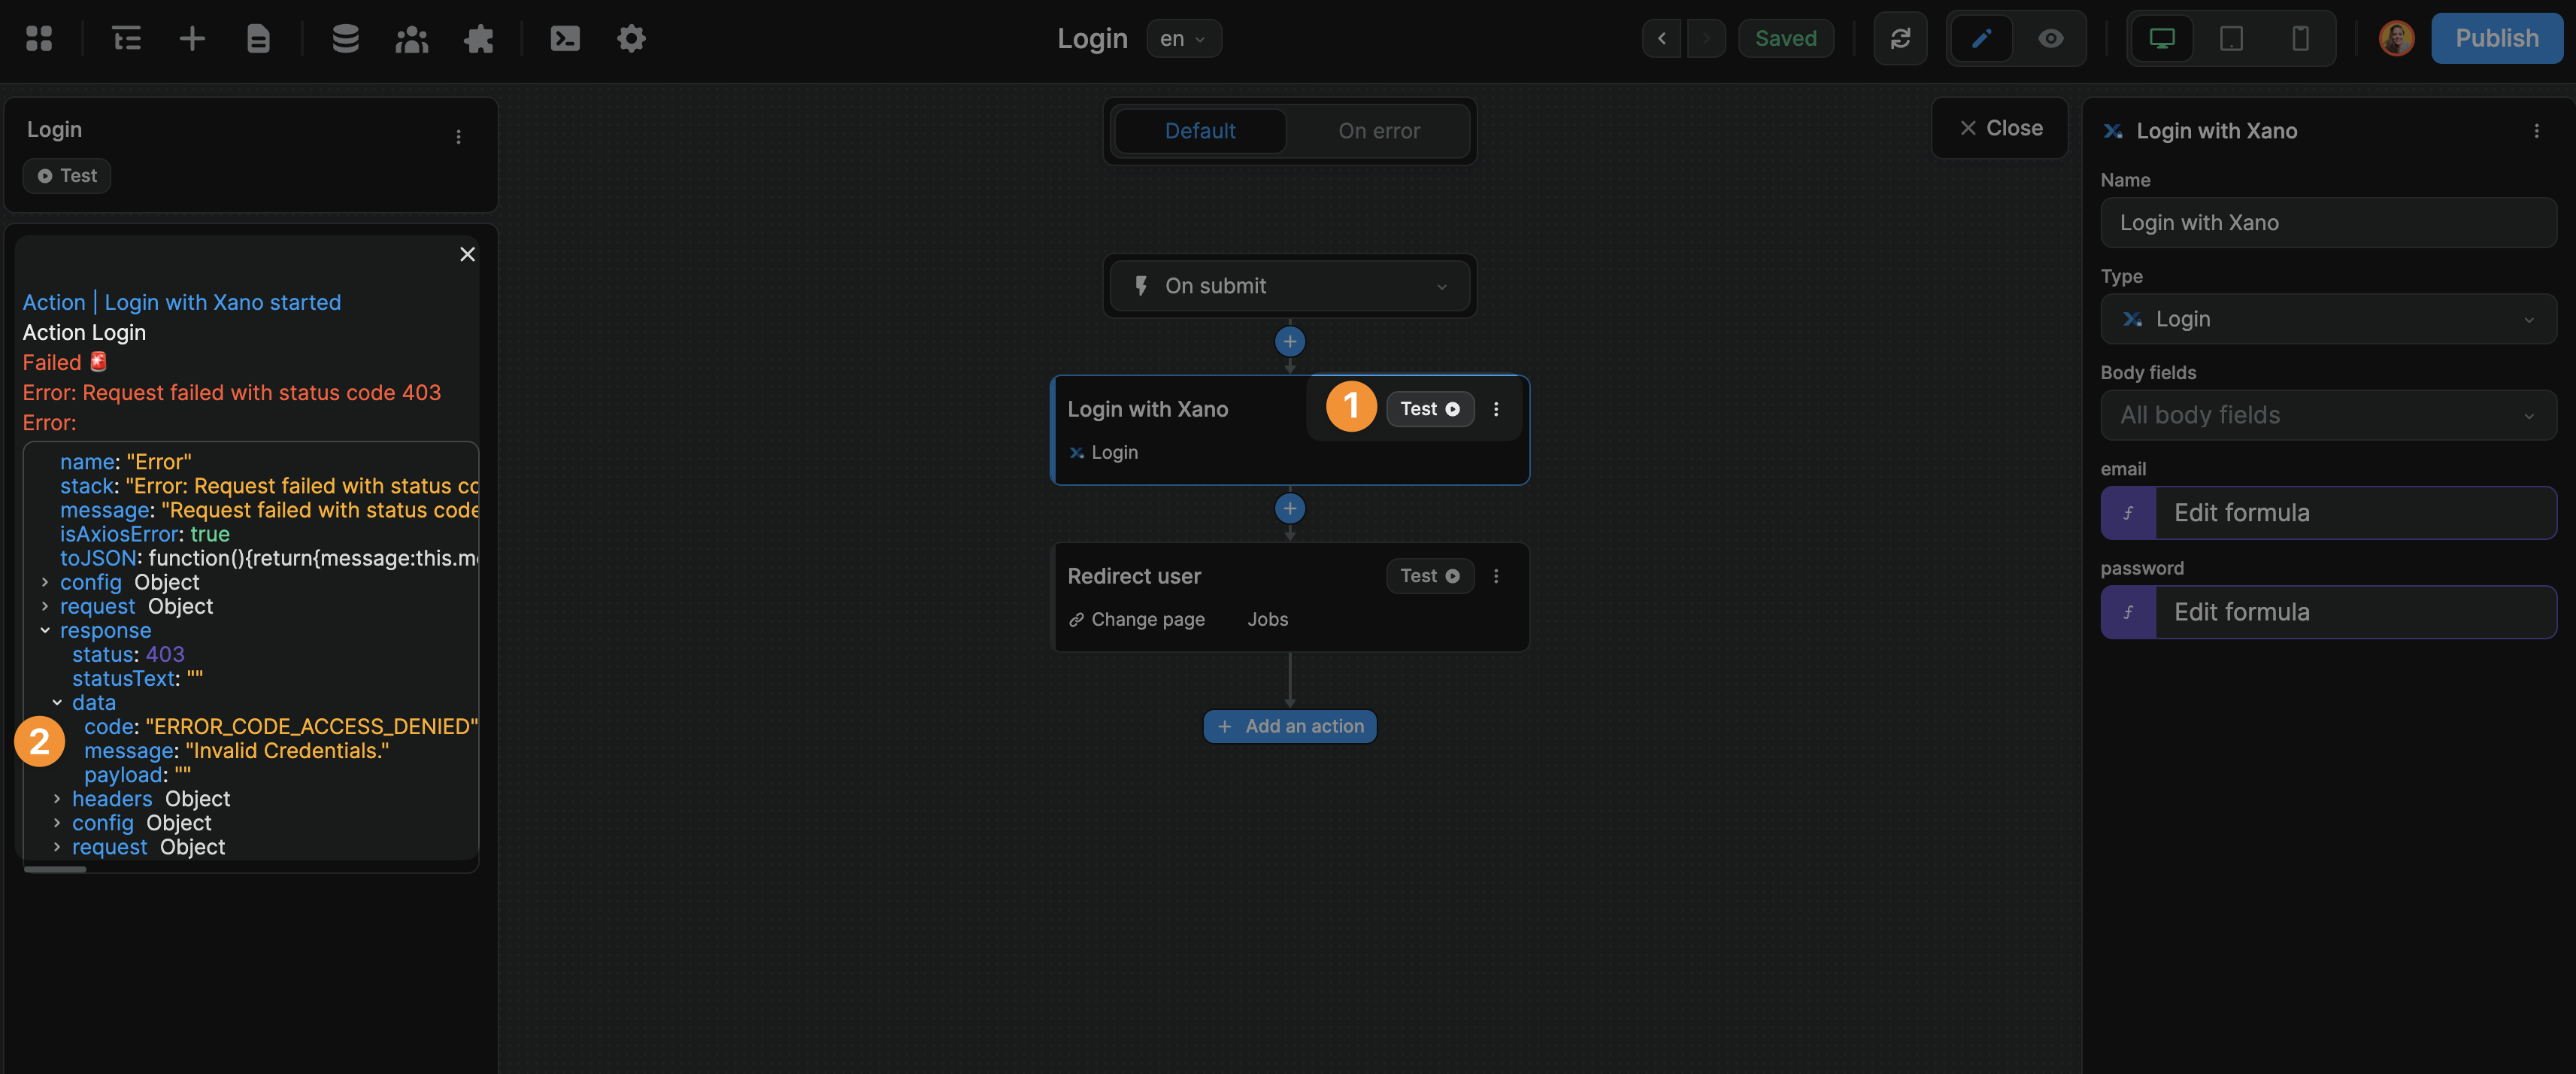 Test a workflow action in WeWeb